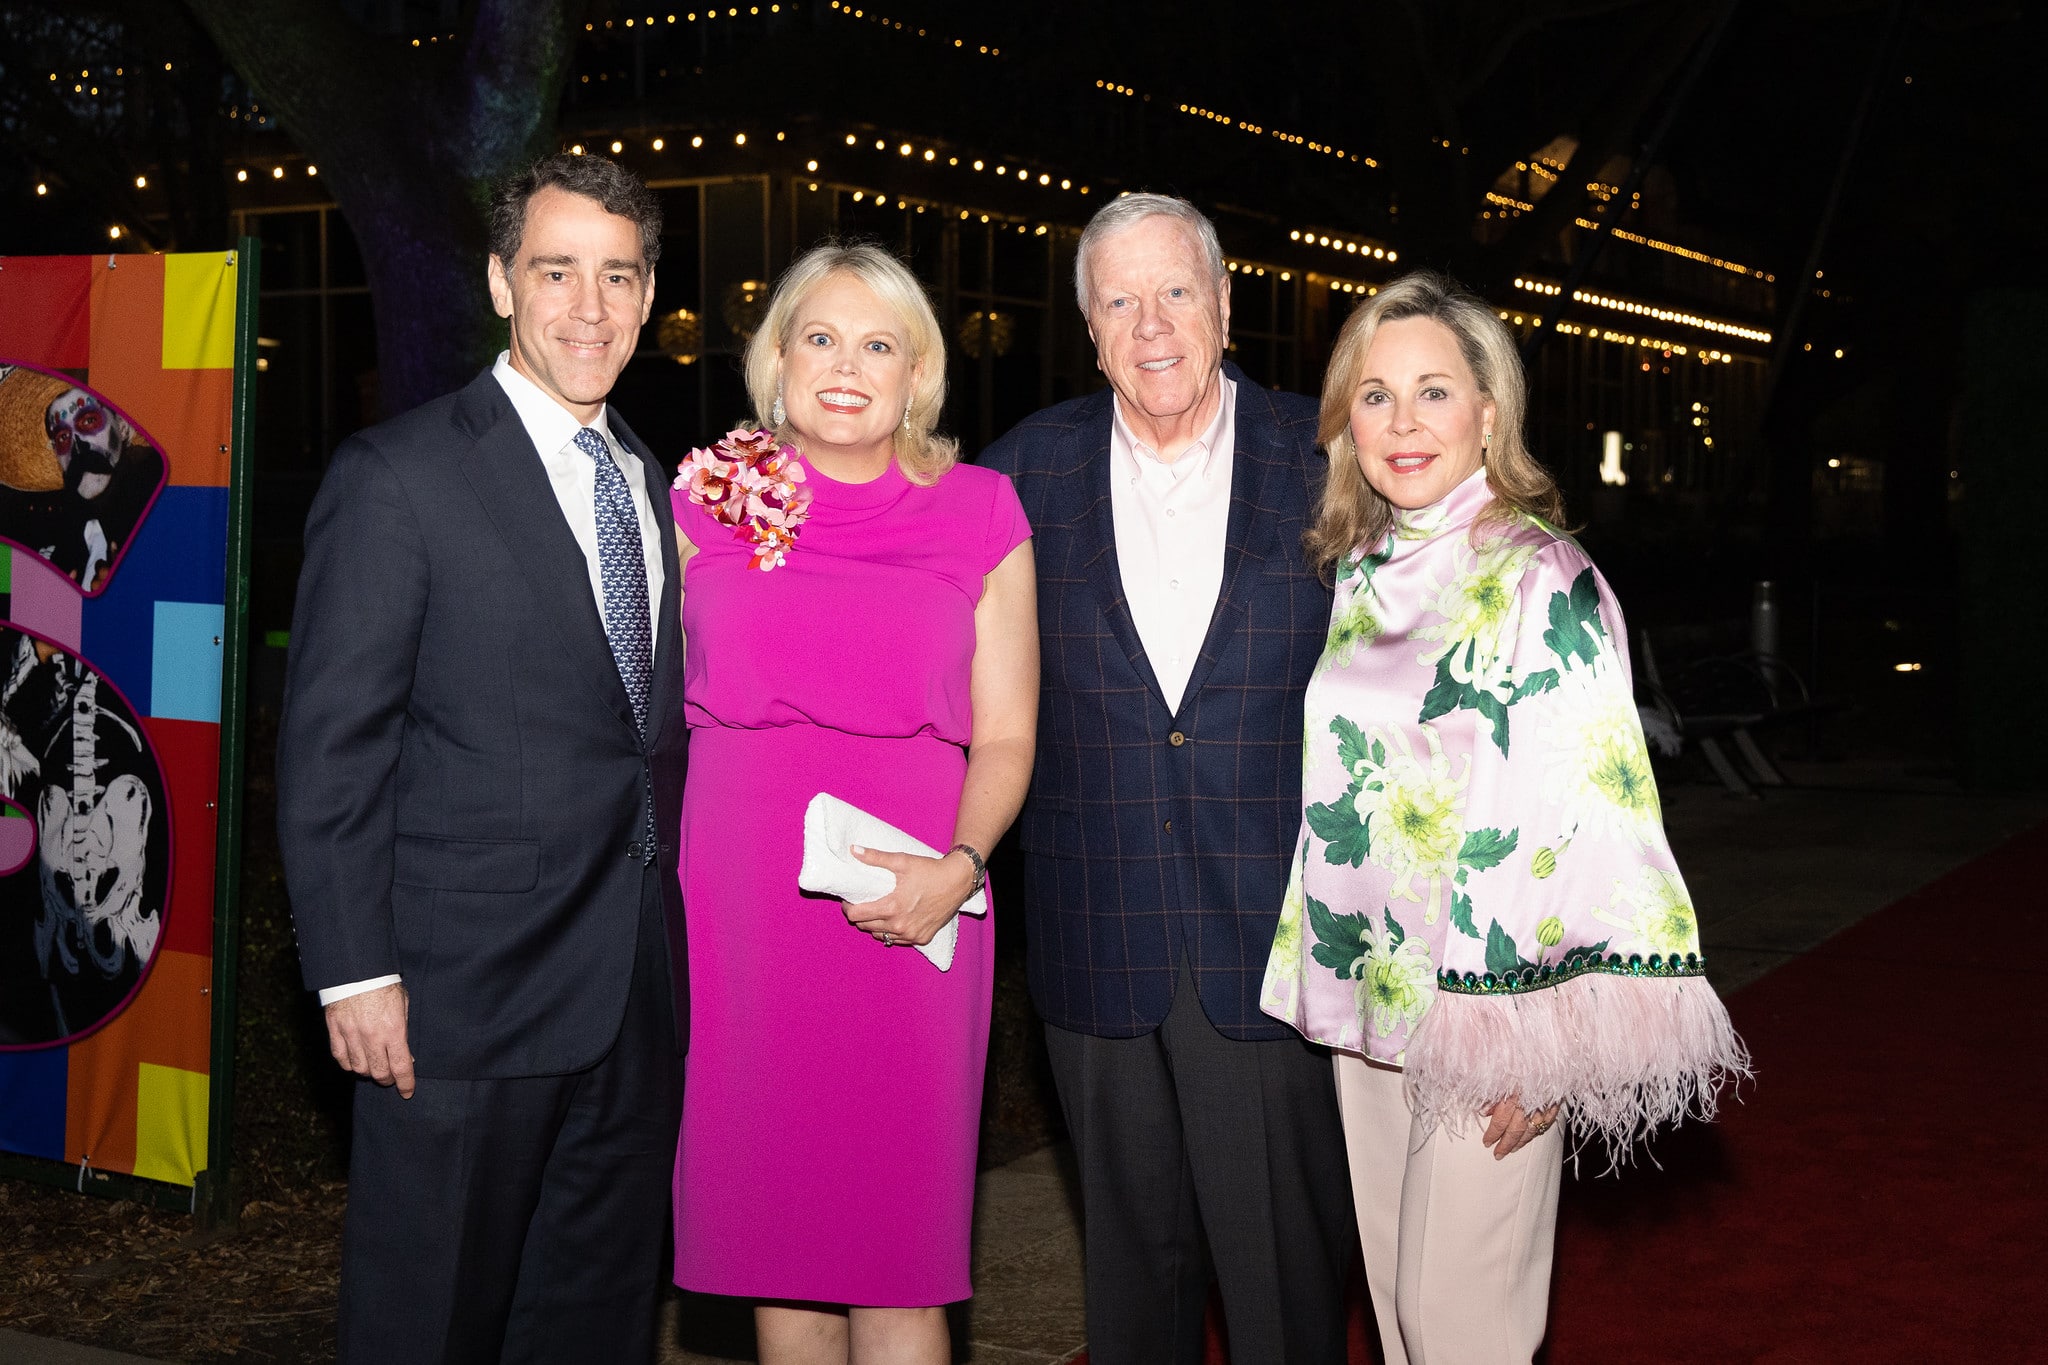 From L-R: Drew Sudduth, Julie Sudduth, Rich Kinder, Nancy Kinder  Gala on the Green® at Discovery Green in downtown Houston. February 23, 2023. Photo: Lawrence Elizabeth Knox